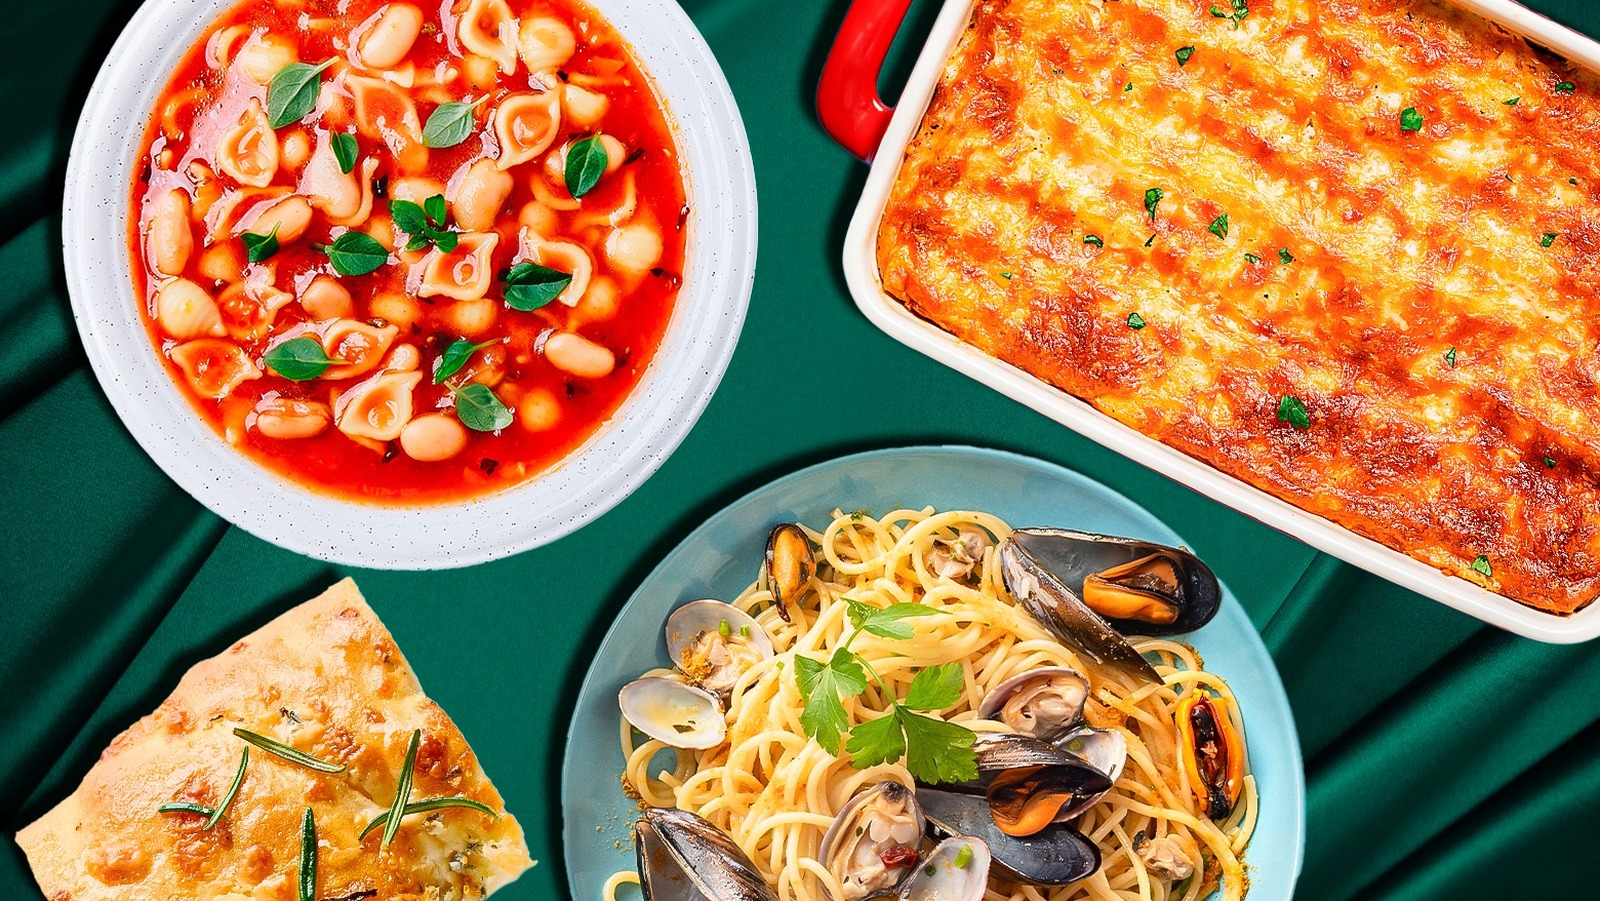 https://www.tastingtable.com/img/gallery/20-italian-dishes-you-need-to-try-at-least-once/l-intro-1702481237.jpg